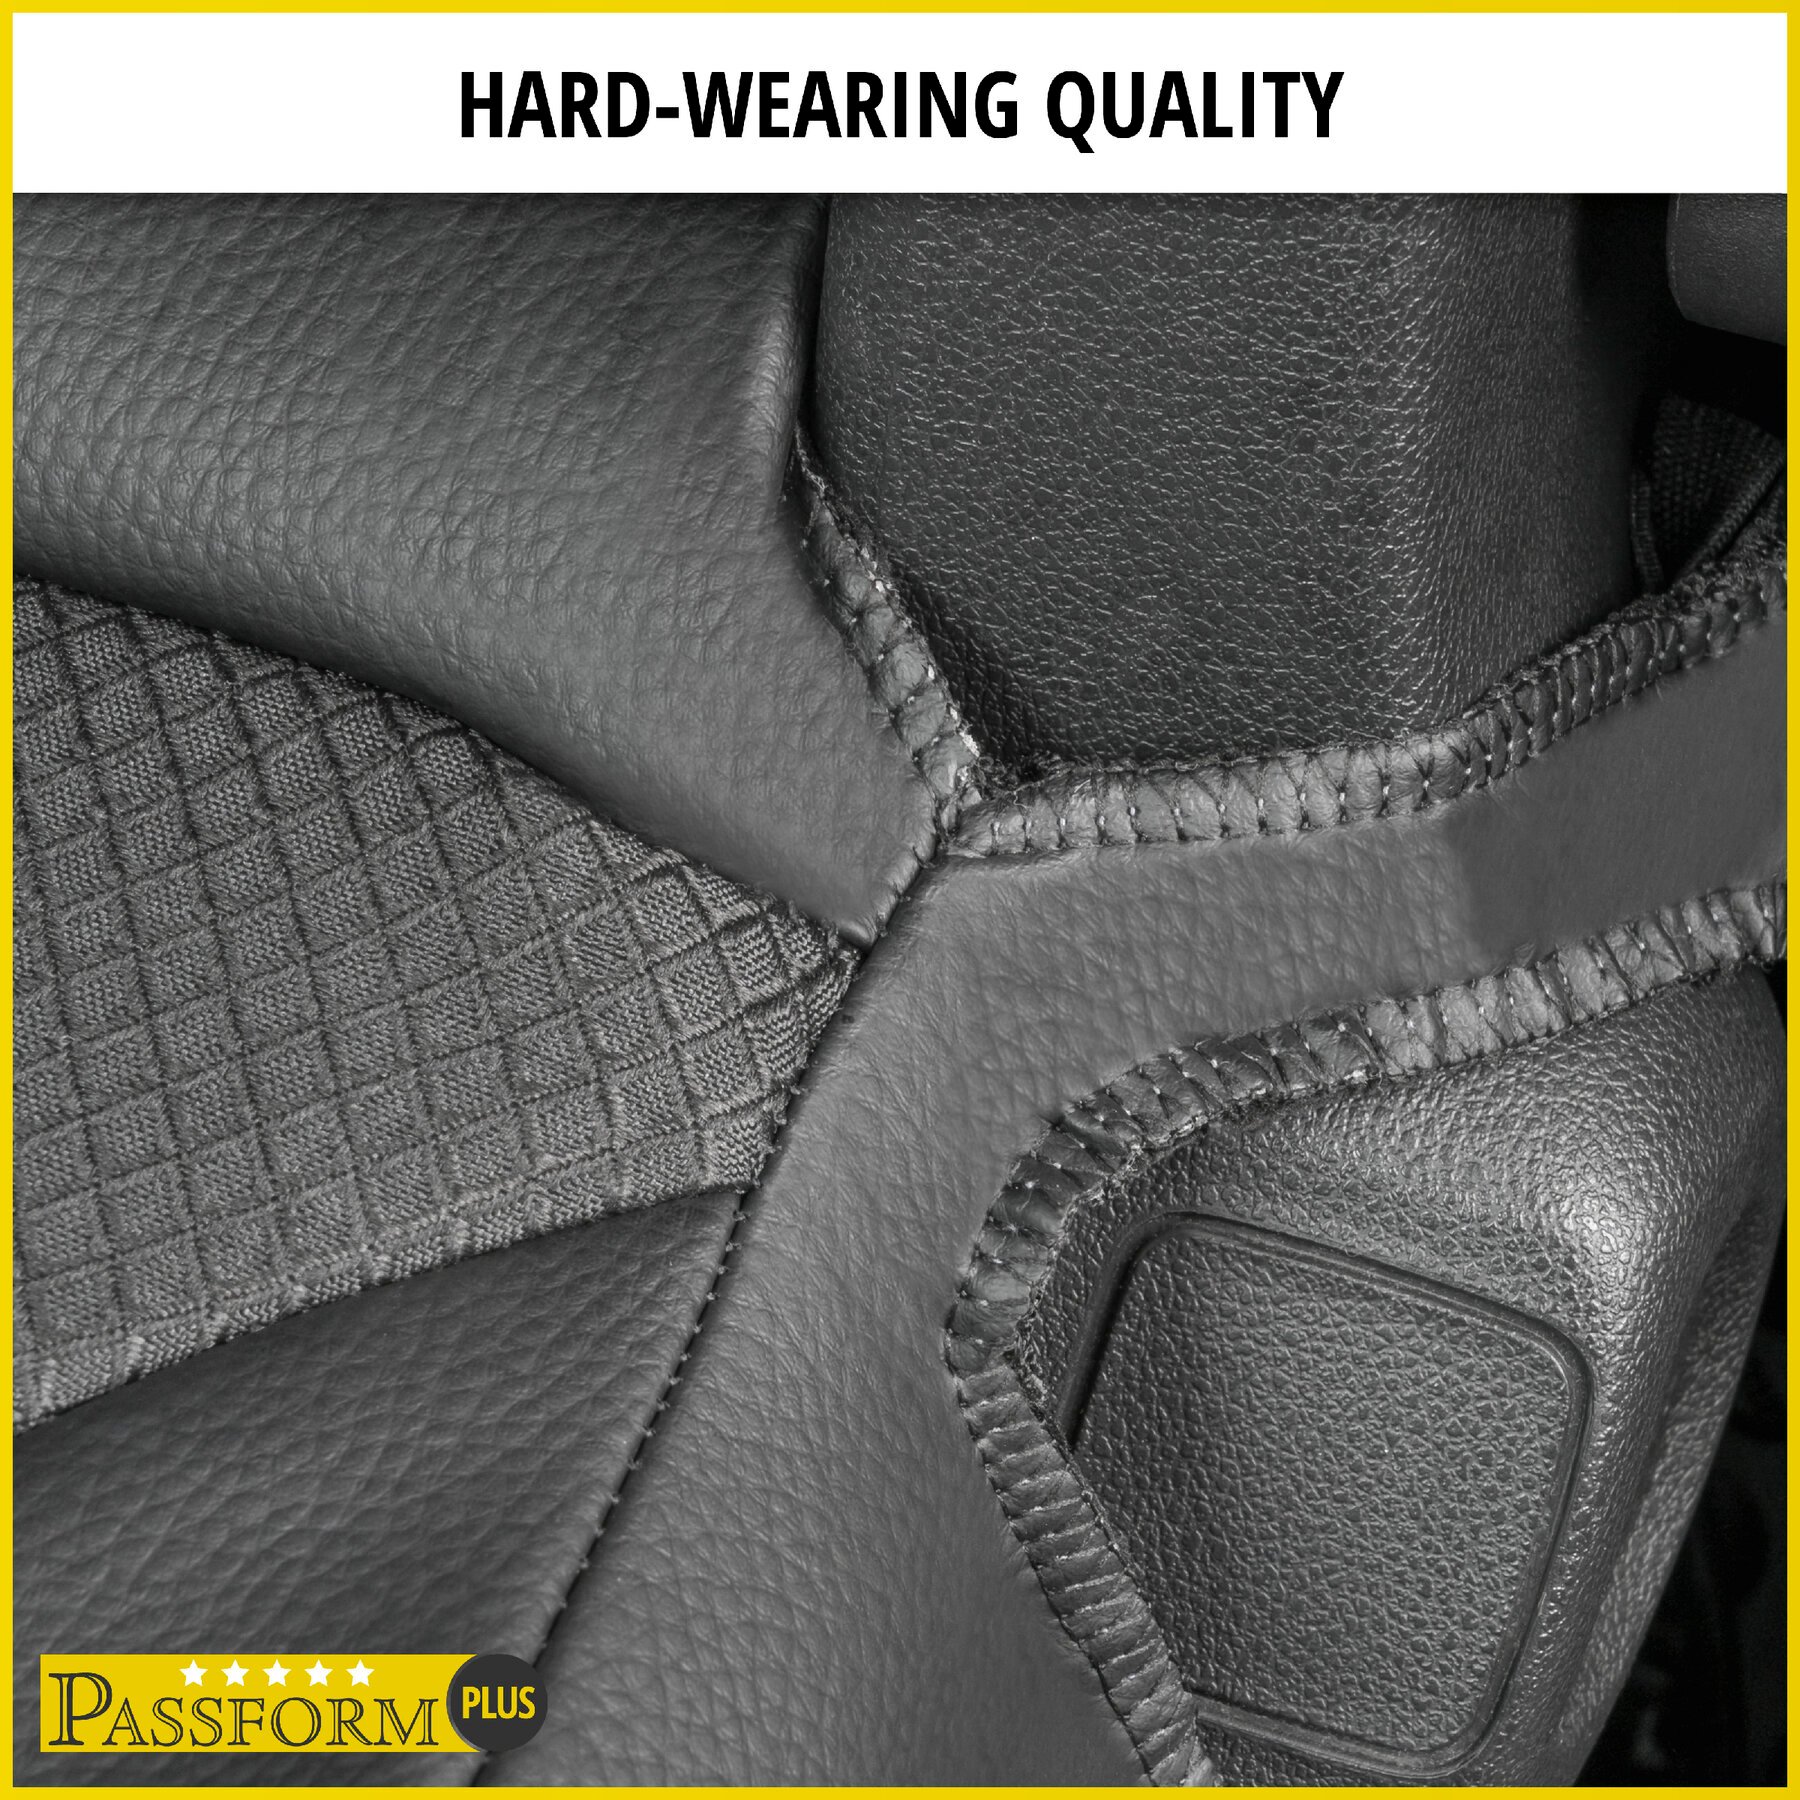 Premium Seat Cover for Ford Transit Custom 2012-Today, 1 single seat cover front, 1 double bench cover